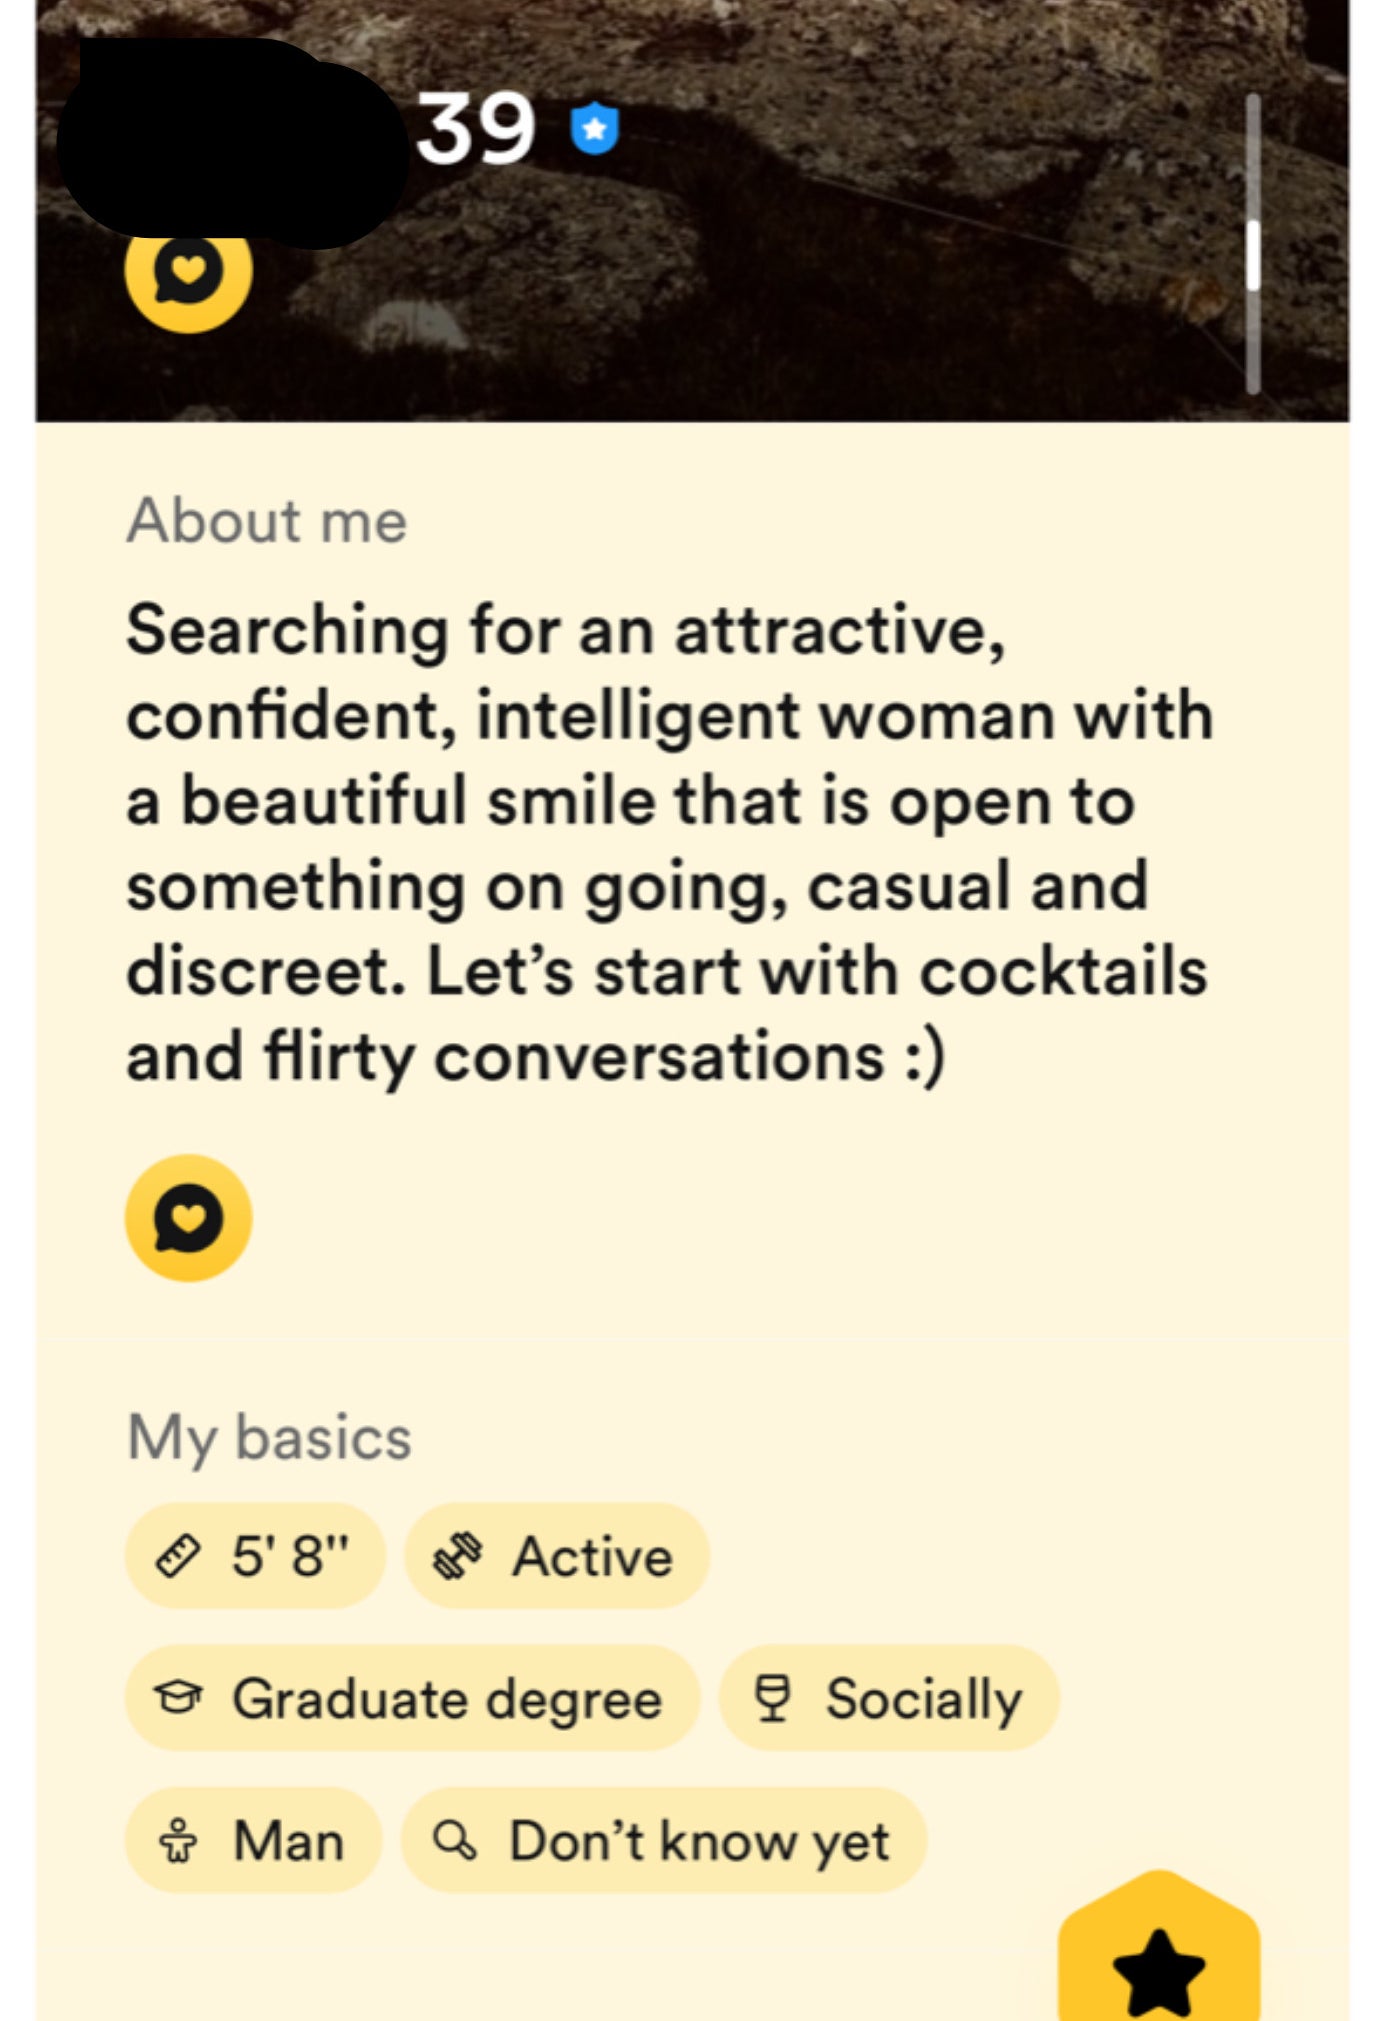 searching for an attractive confident woman with a beautiful smile that is open to something ongoing, casual and discreet. let&#x27;s start with cocktails and flirty conversations